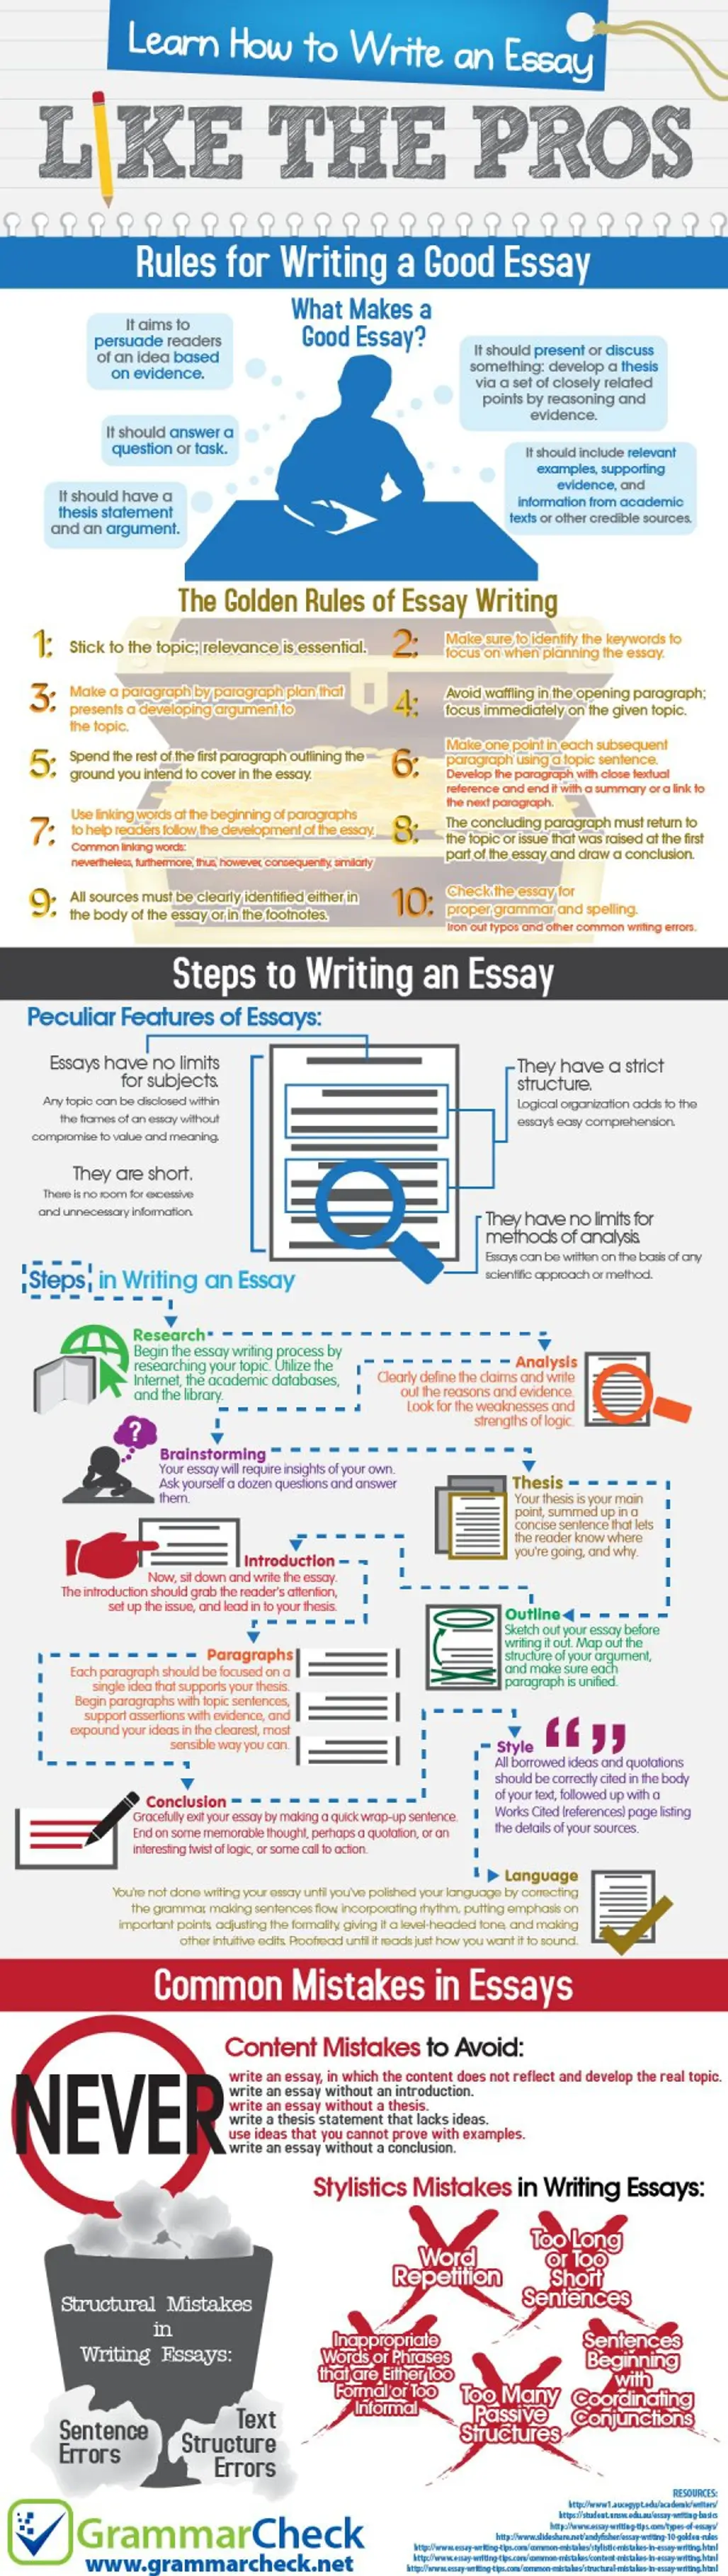 How to Write an Essay like the Pros